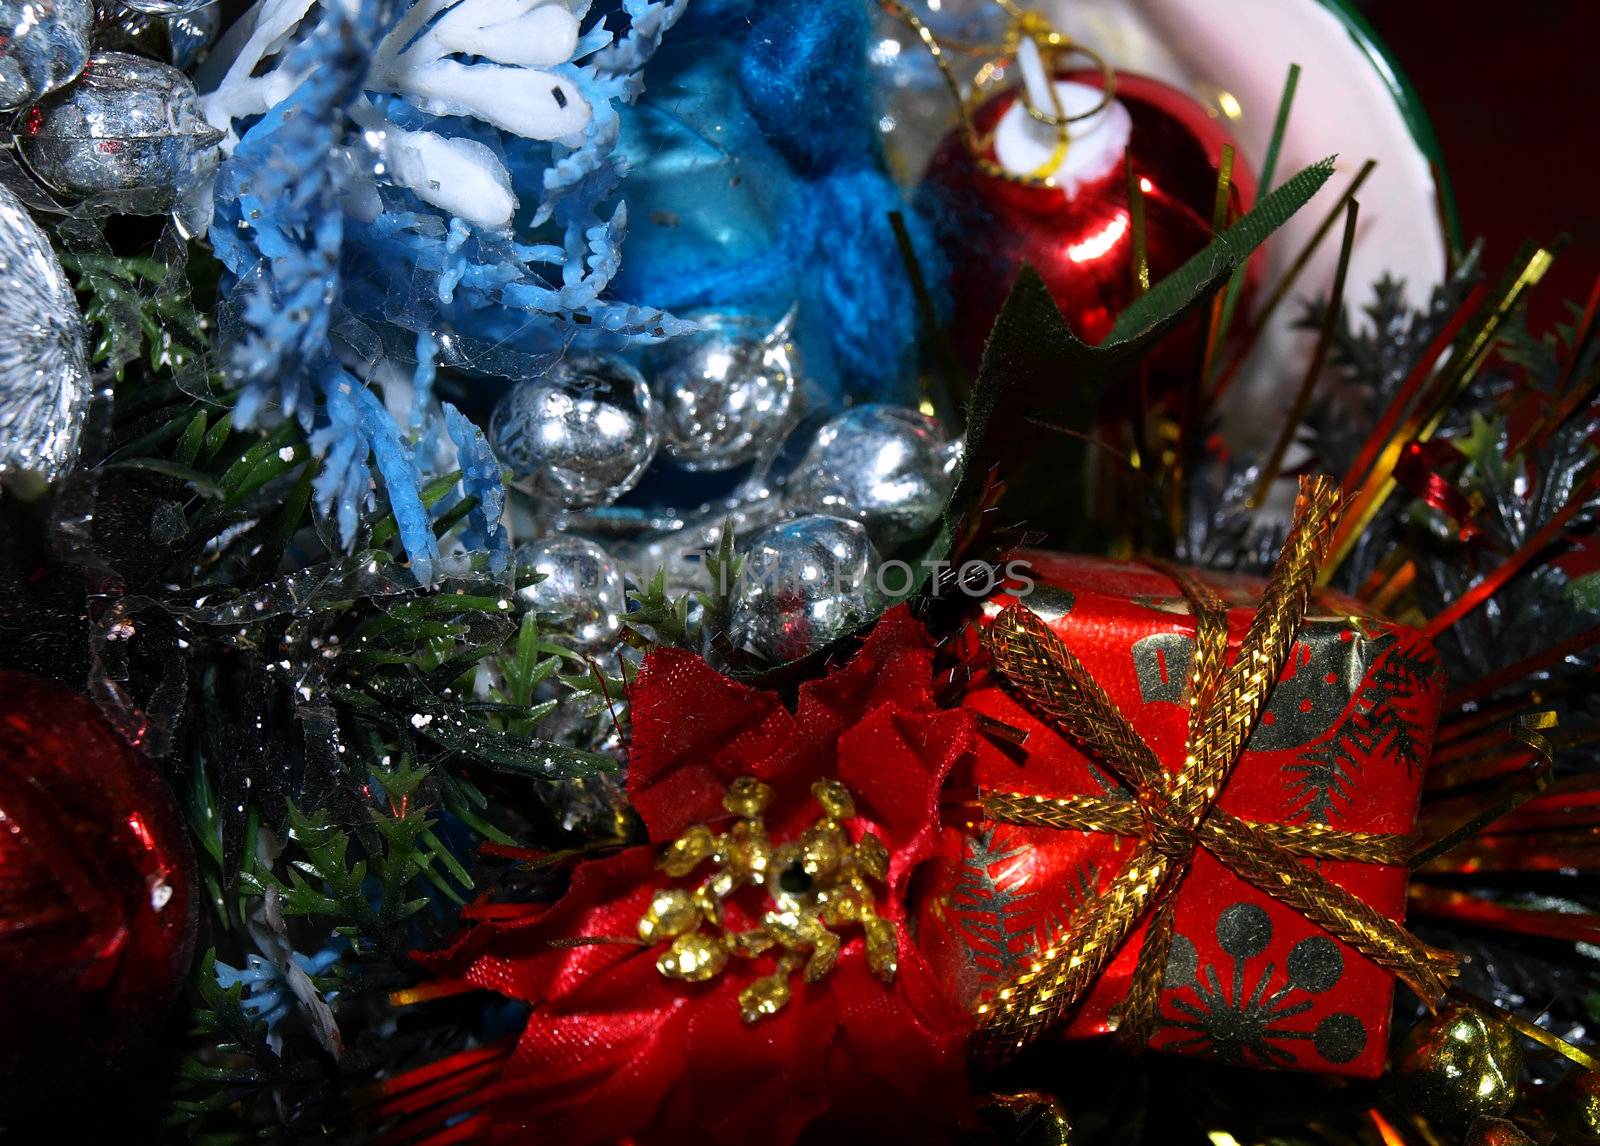 Details of various Christmas decorations ideal as background